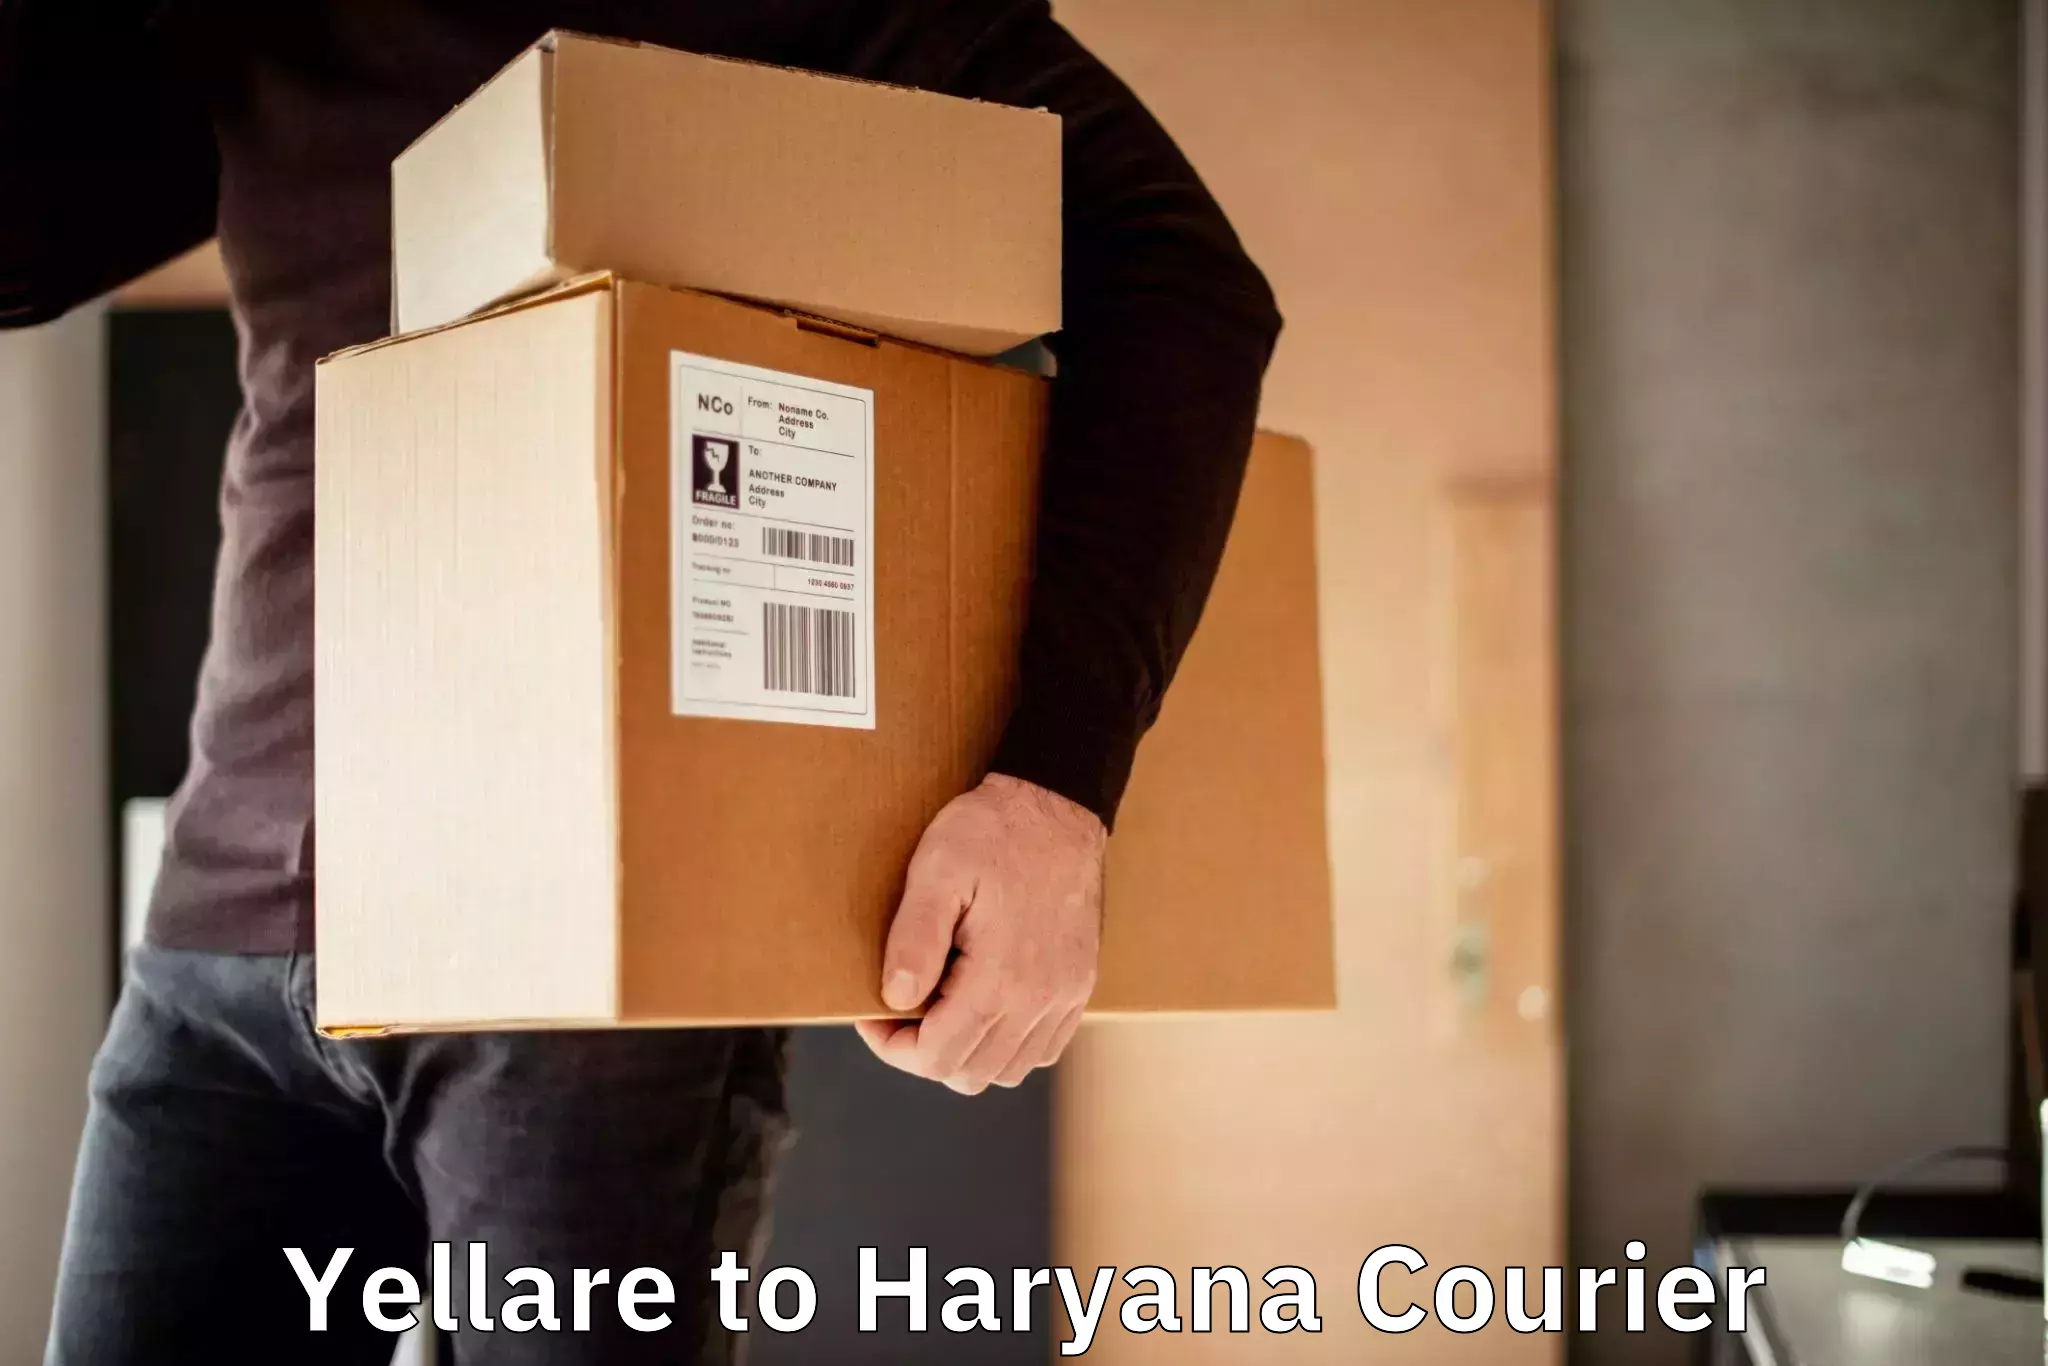 Express package services Yellare to Haryana